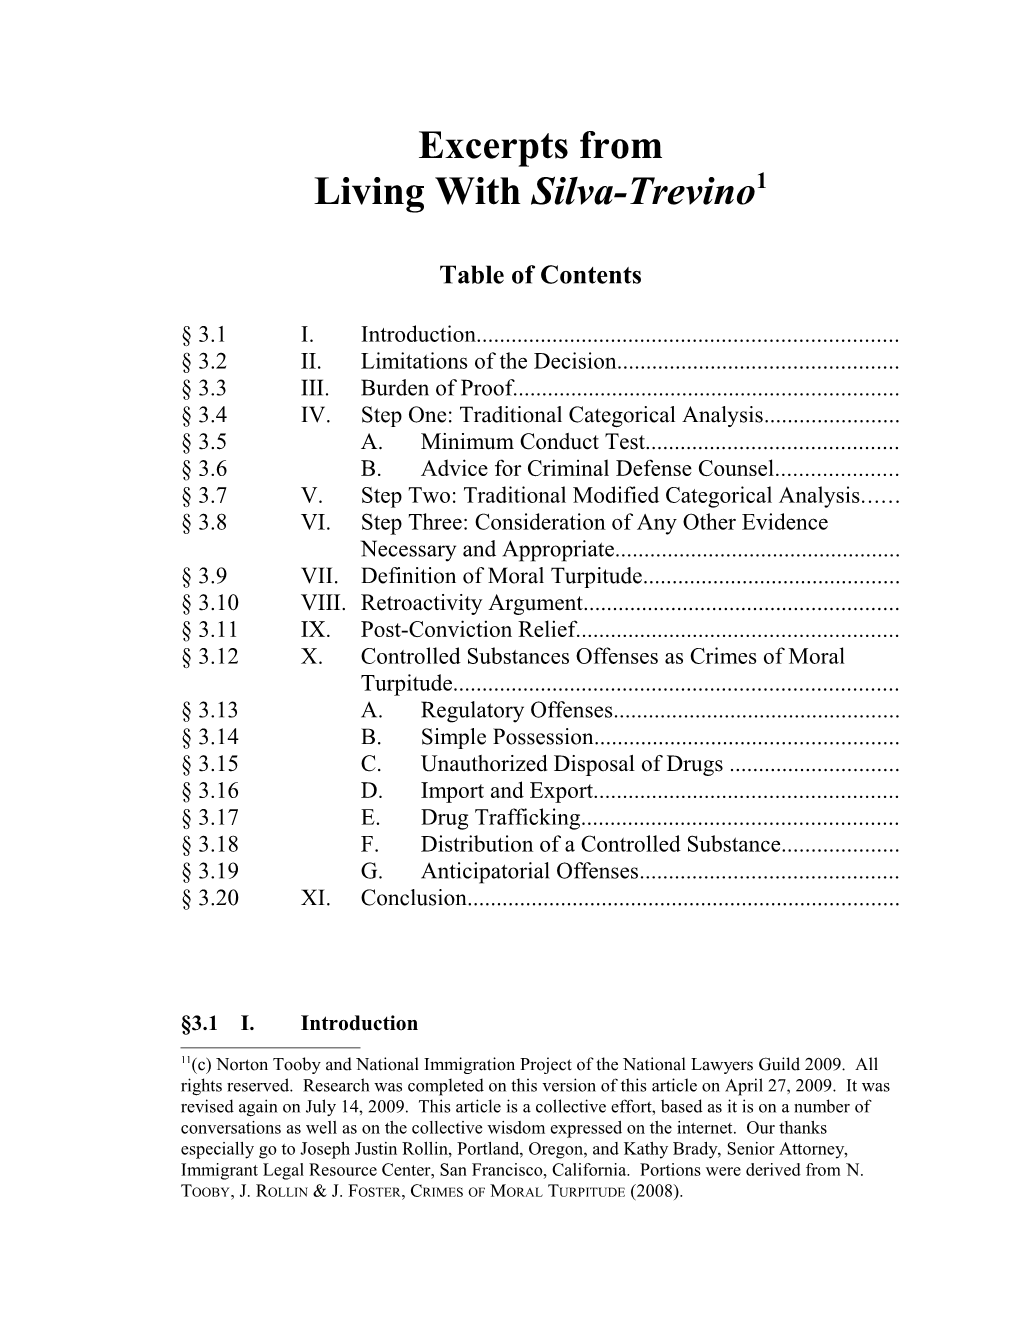 Living with Silva-Trevino 1